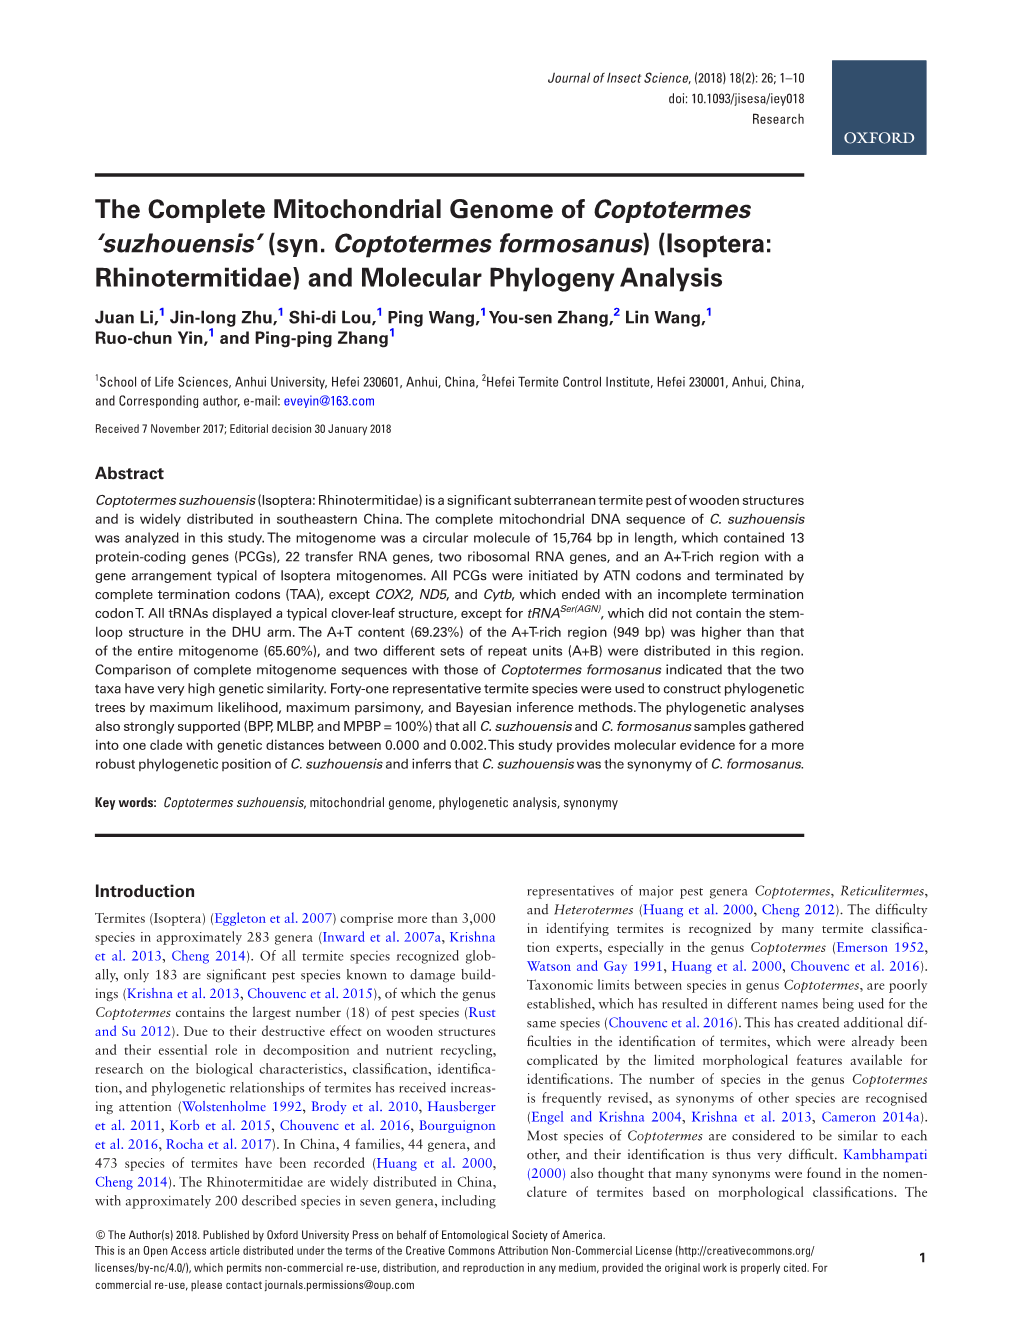 The Complete Mitochondrial Genome of Coptotermes ‘Suzhouensis’ (Syn